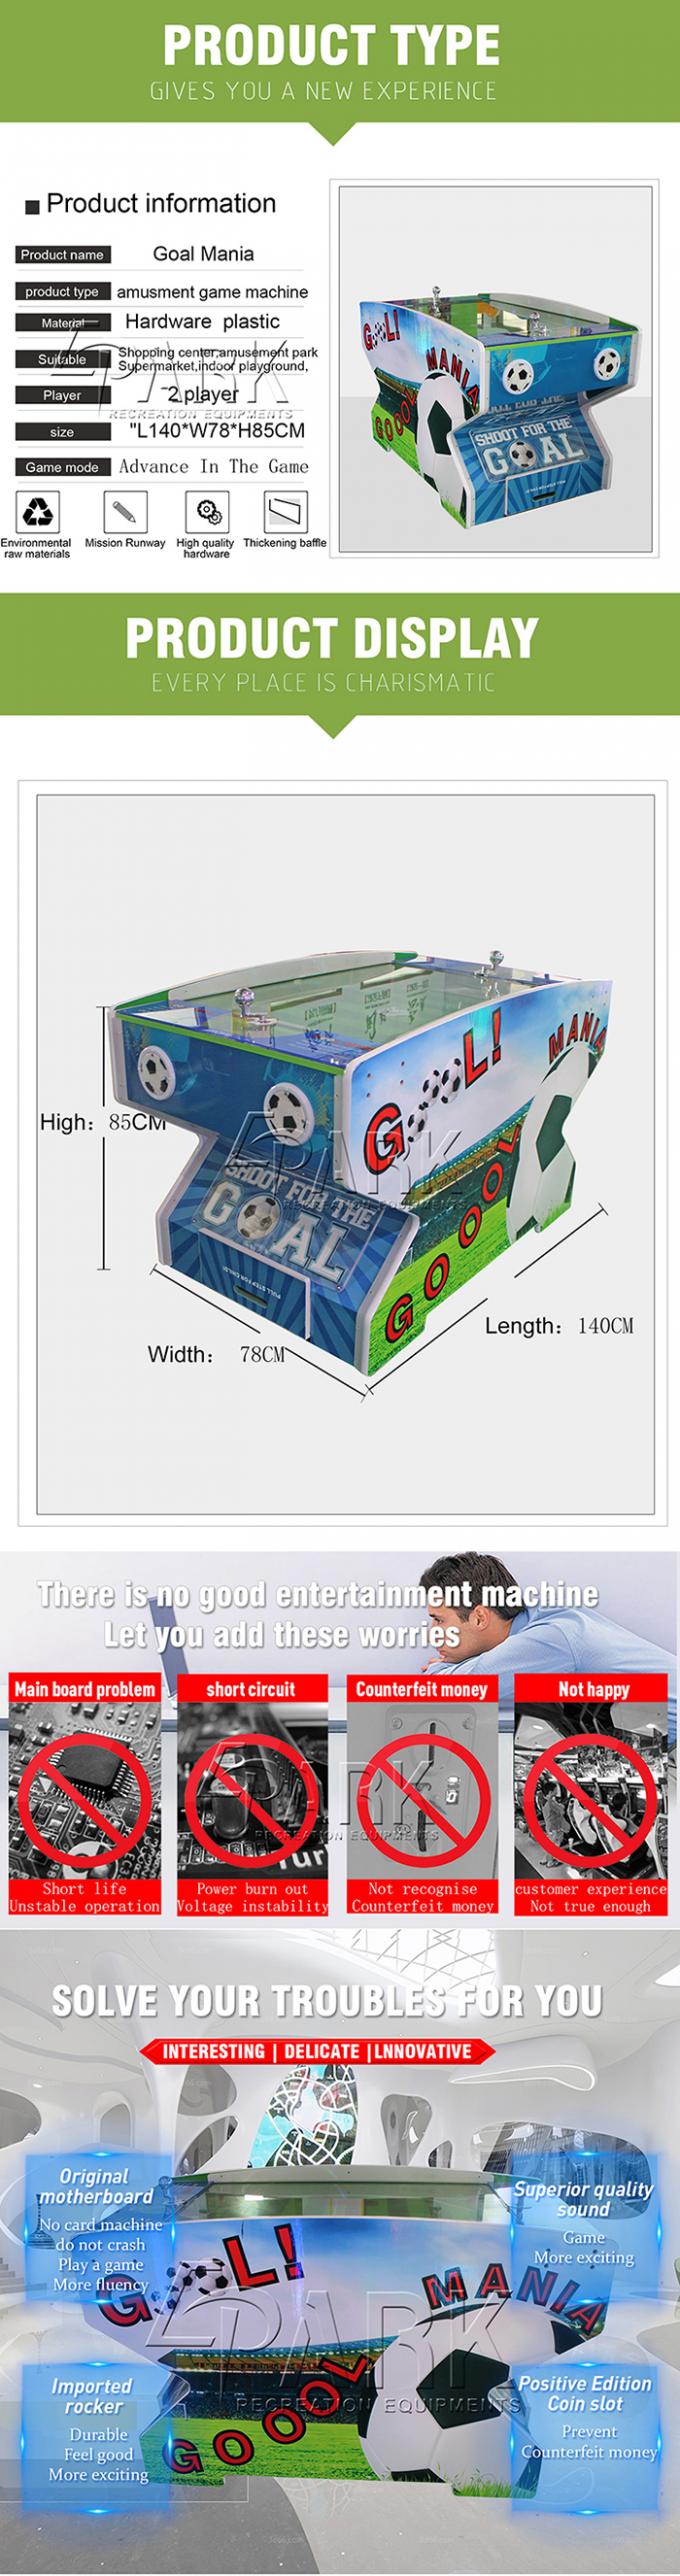 latest company news about Goal Mania game machine  0